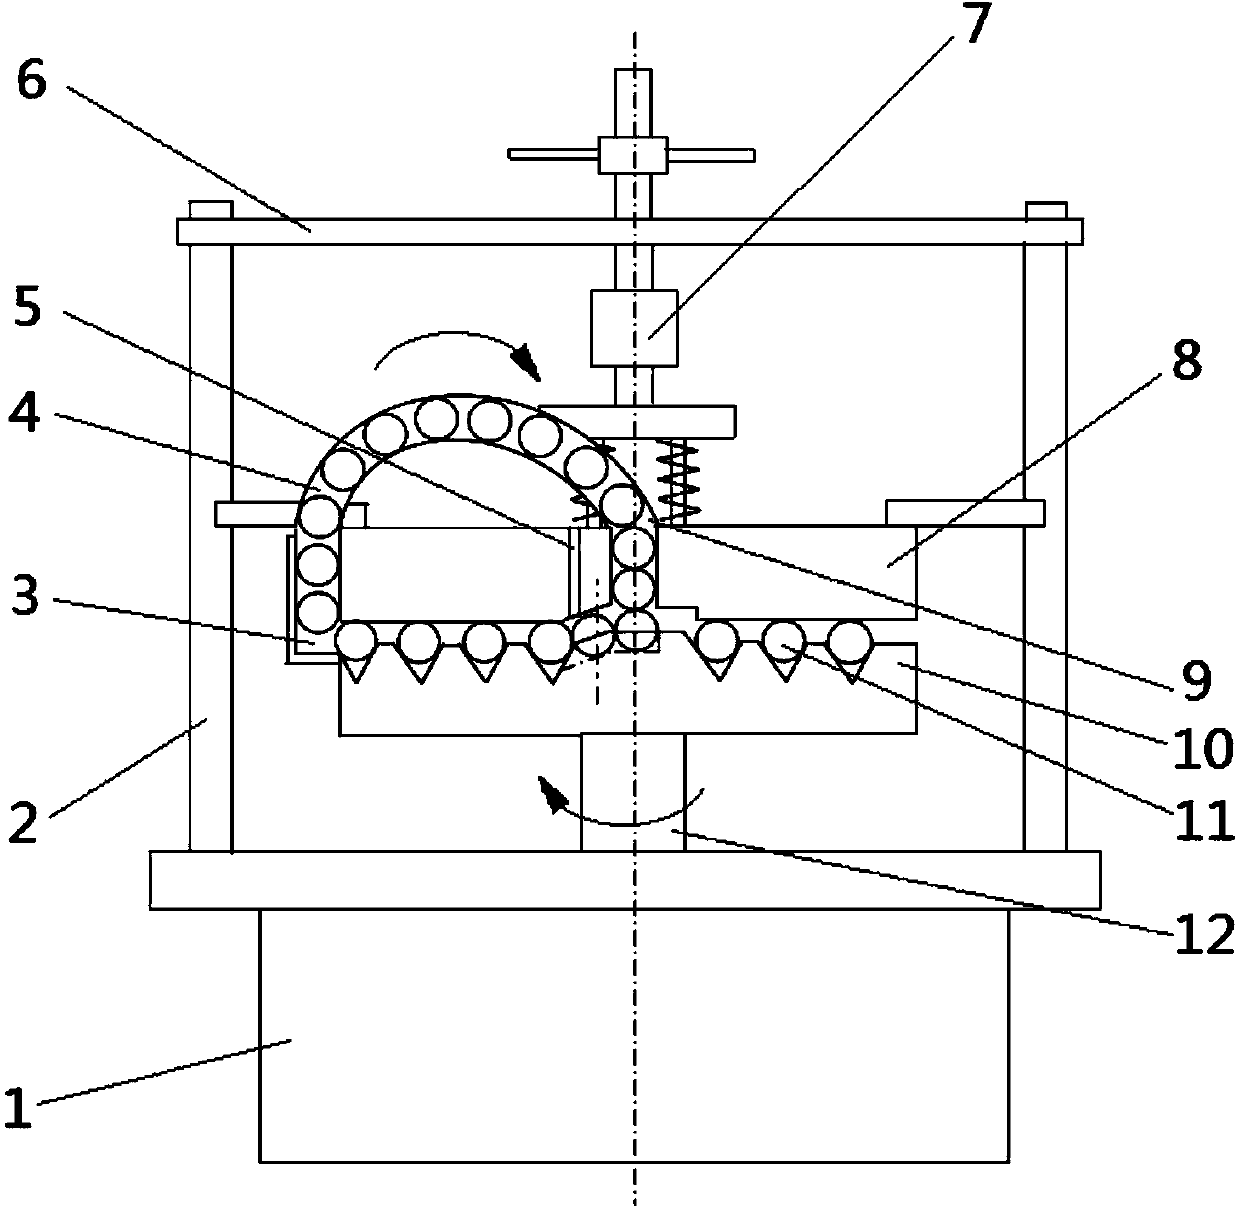 High-accuracy sphere machining device based on eccentric variable-curvature V-shaped grooved disc